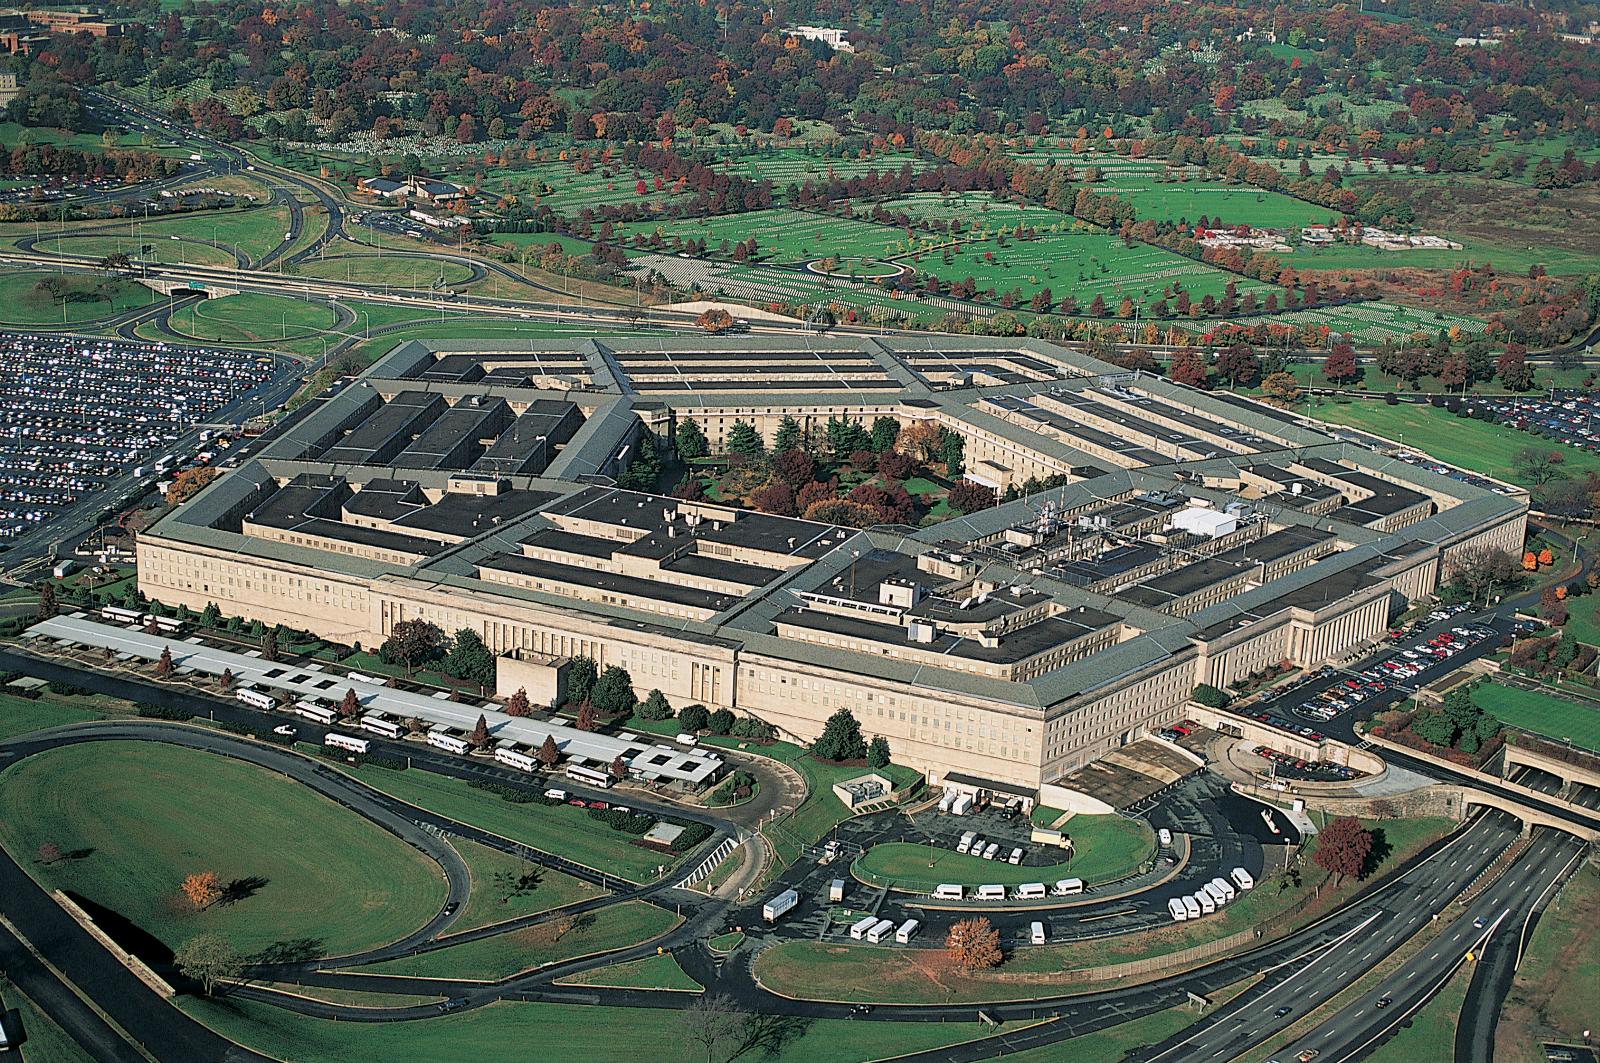 The Surreal, Baffling Place That the Pentagon’s Intelligence Leaked